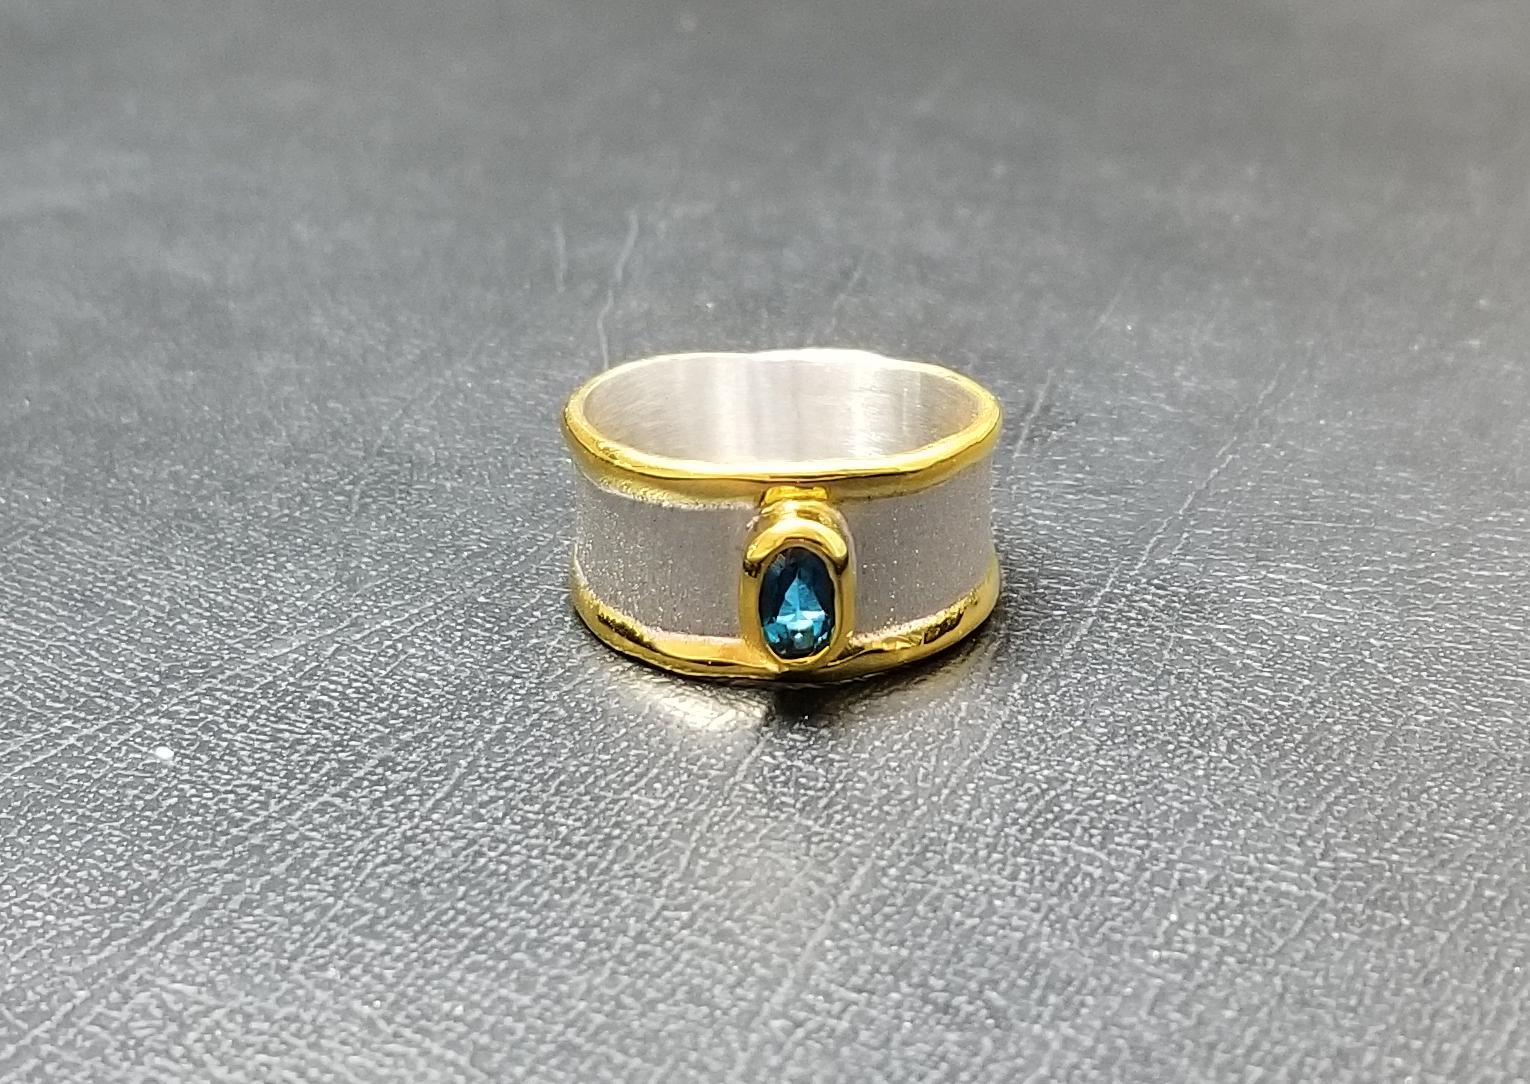 Oval Cut Yianni Creations Blue Topaz Band Ring in Fine Silver and 24 Karat Yellow Gold